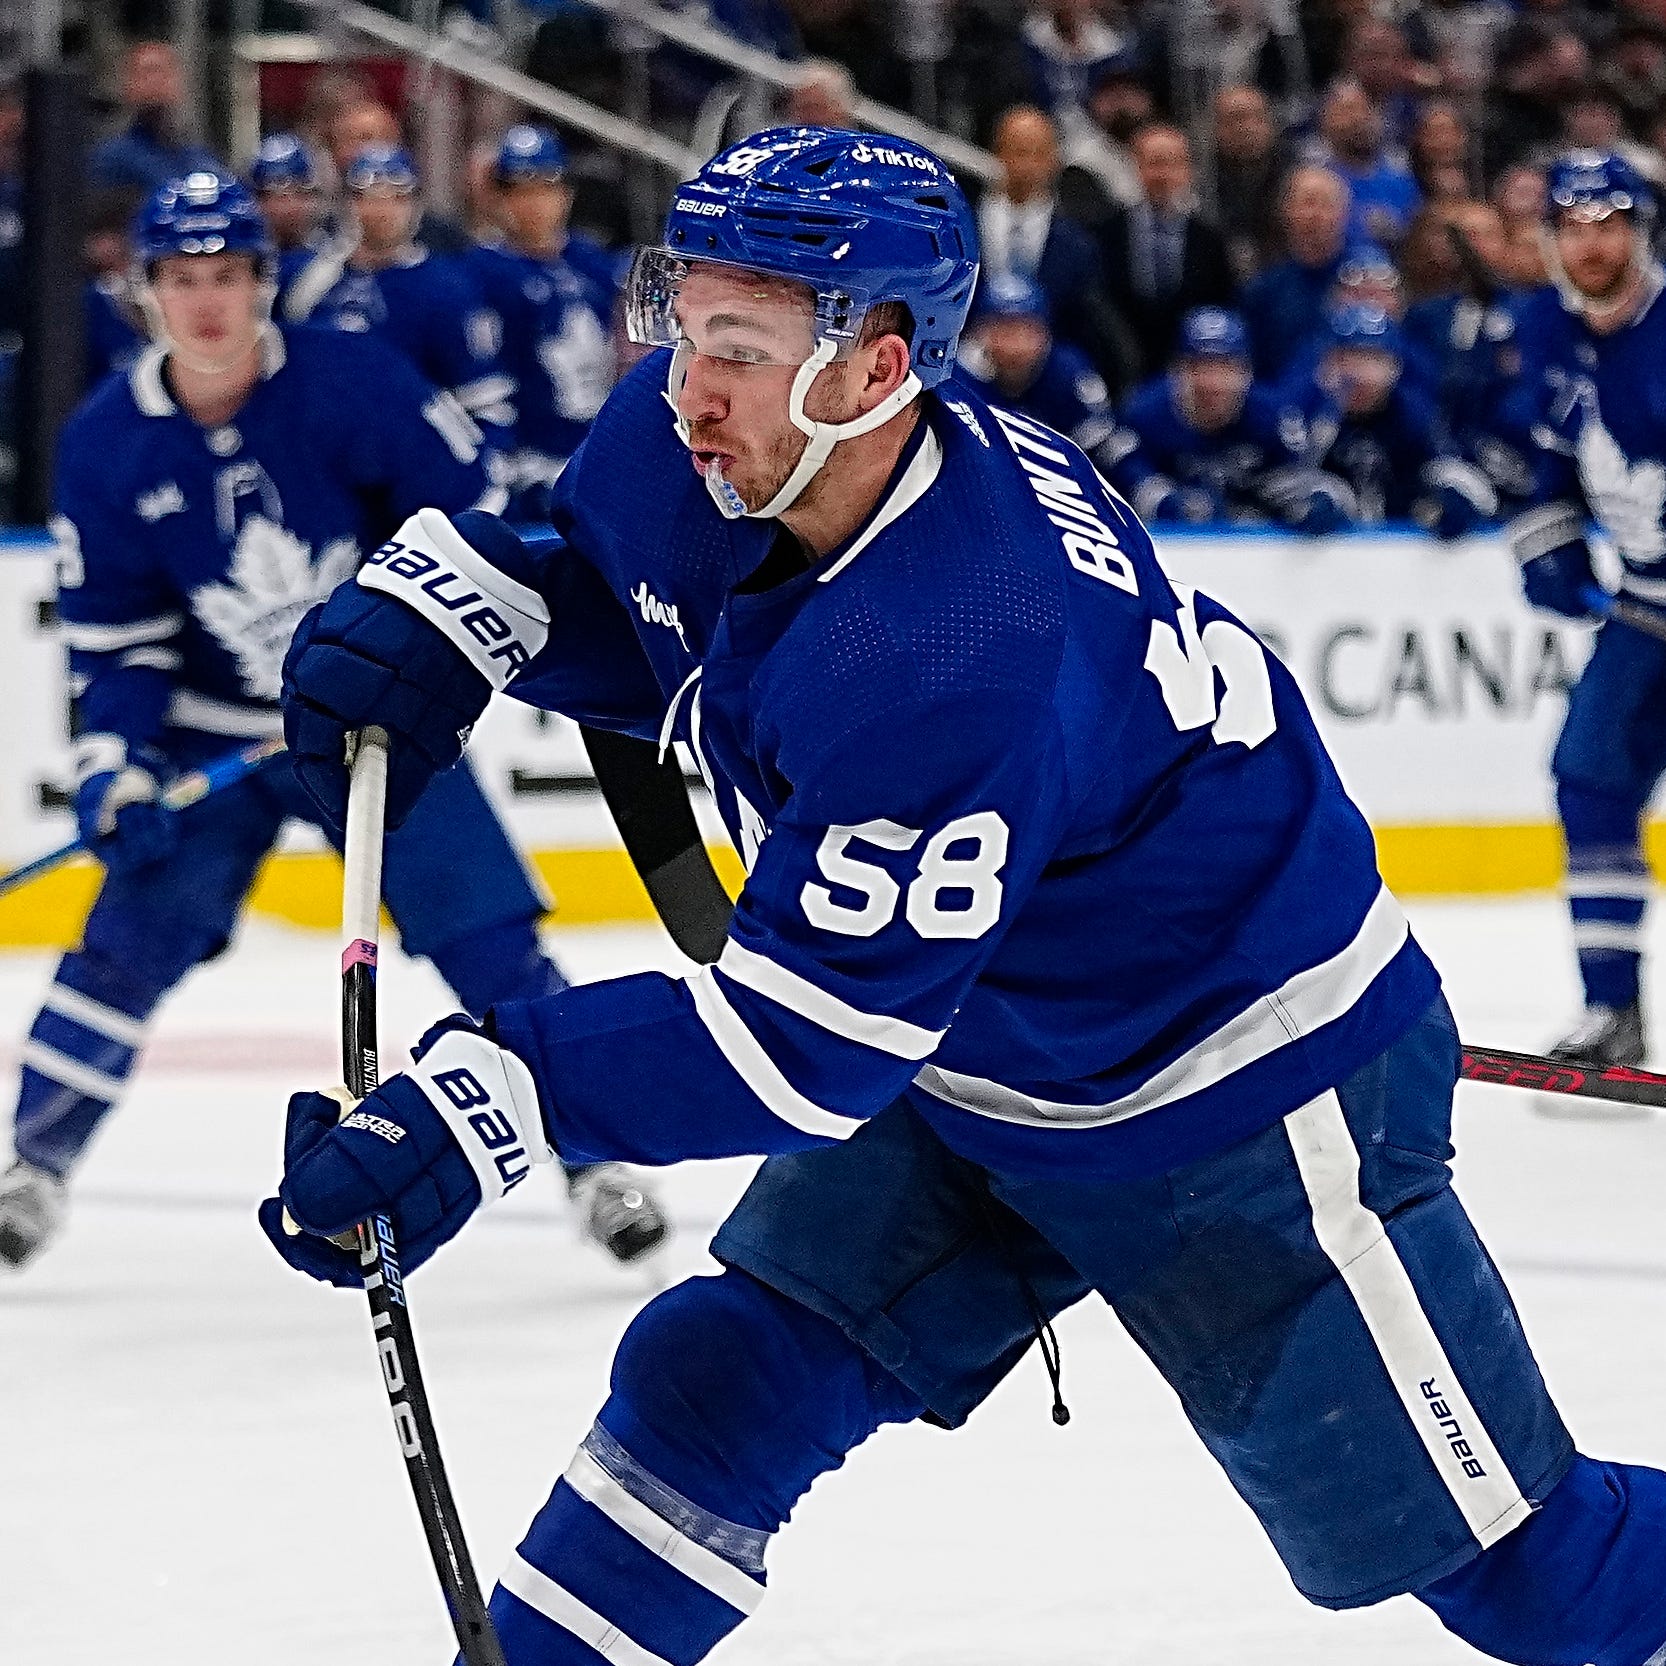 Toronto Maple Leafs forward Michael Bunting received a match penalty on Tuesday night.